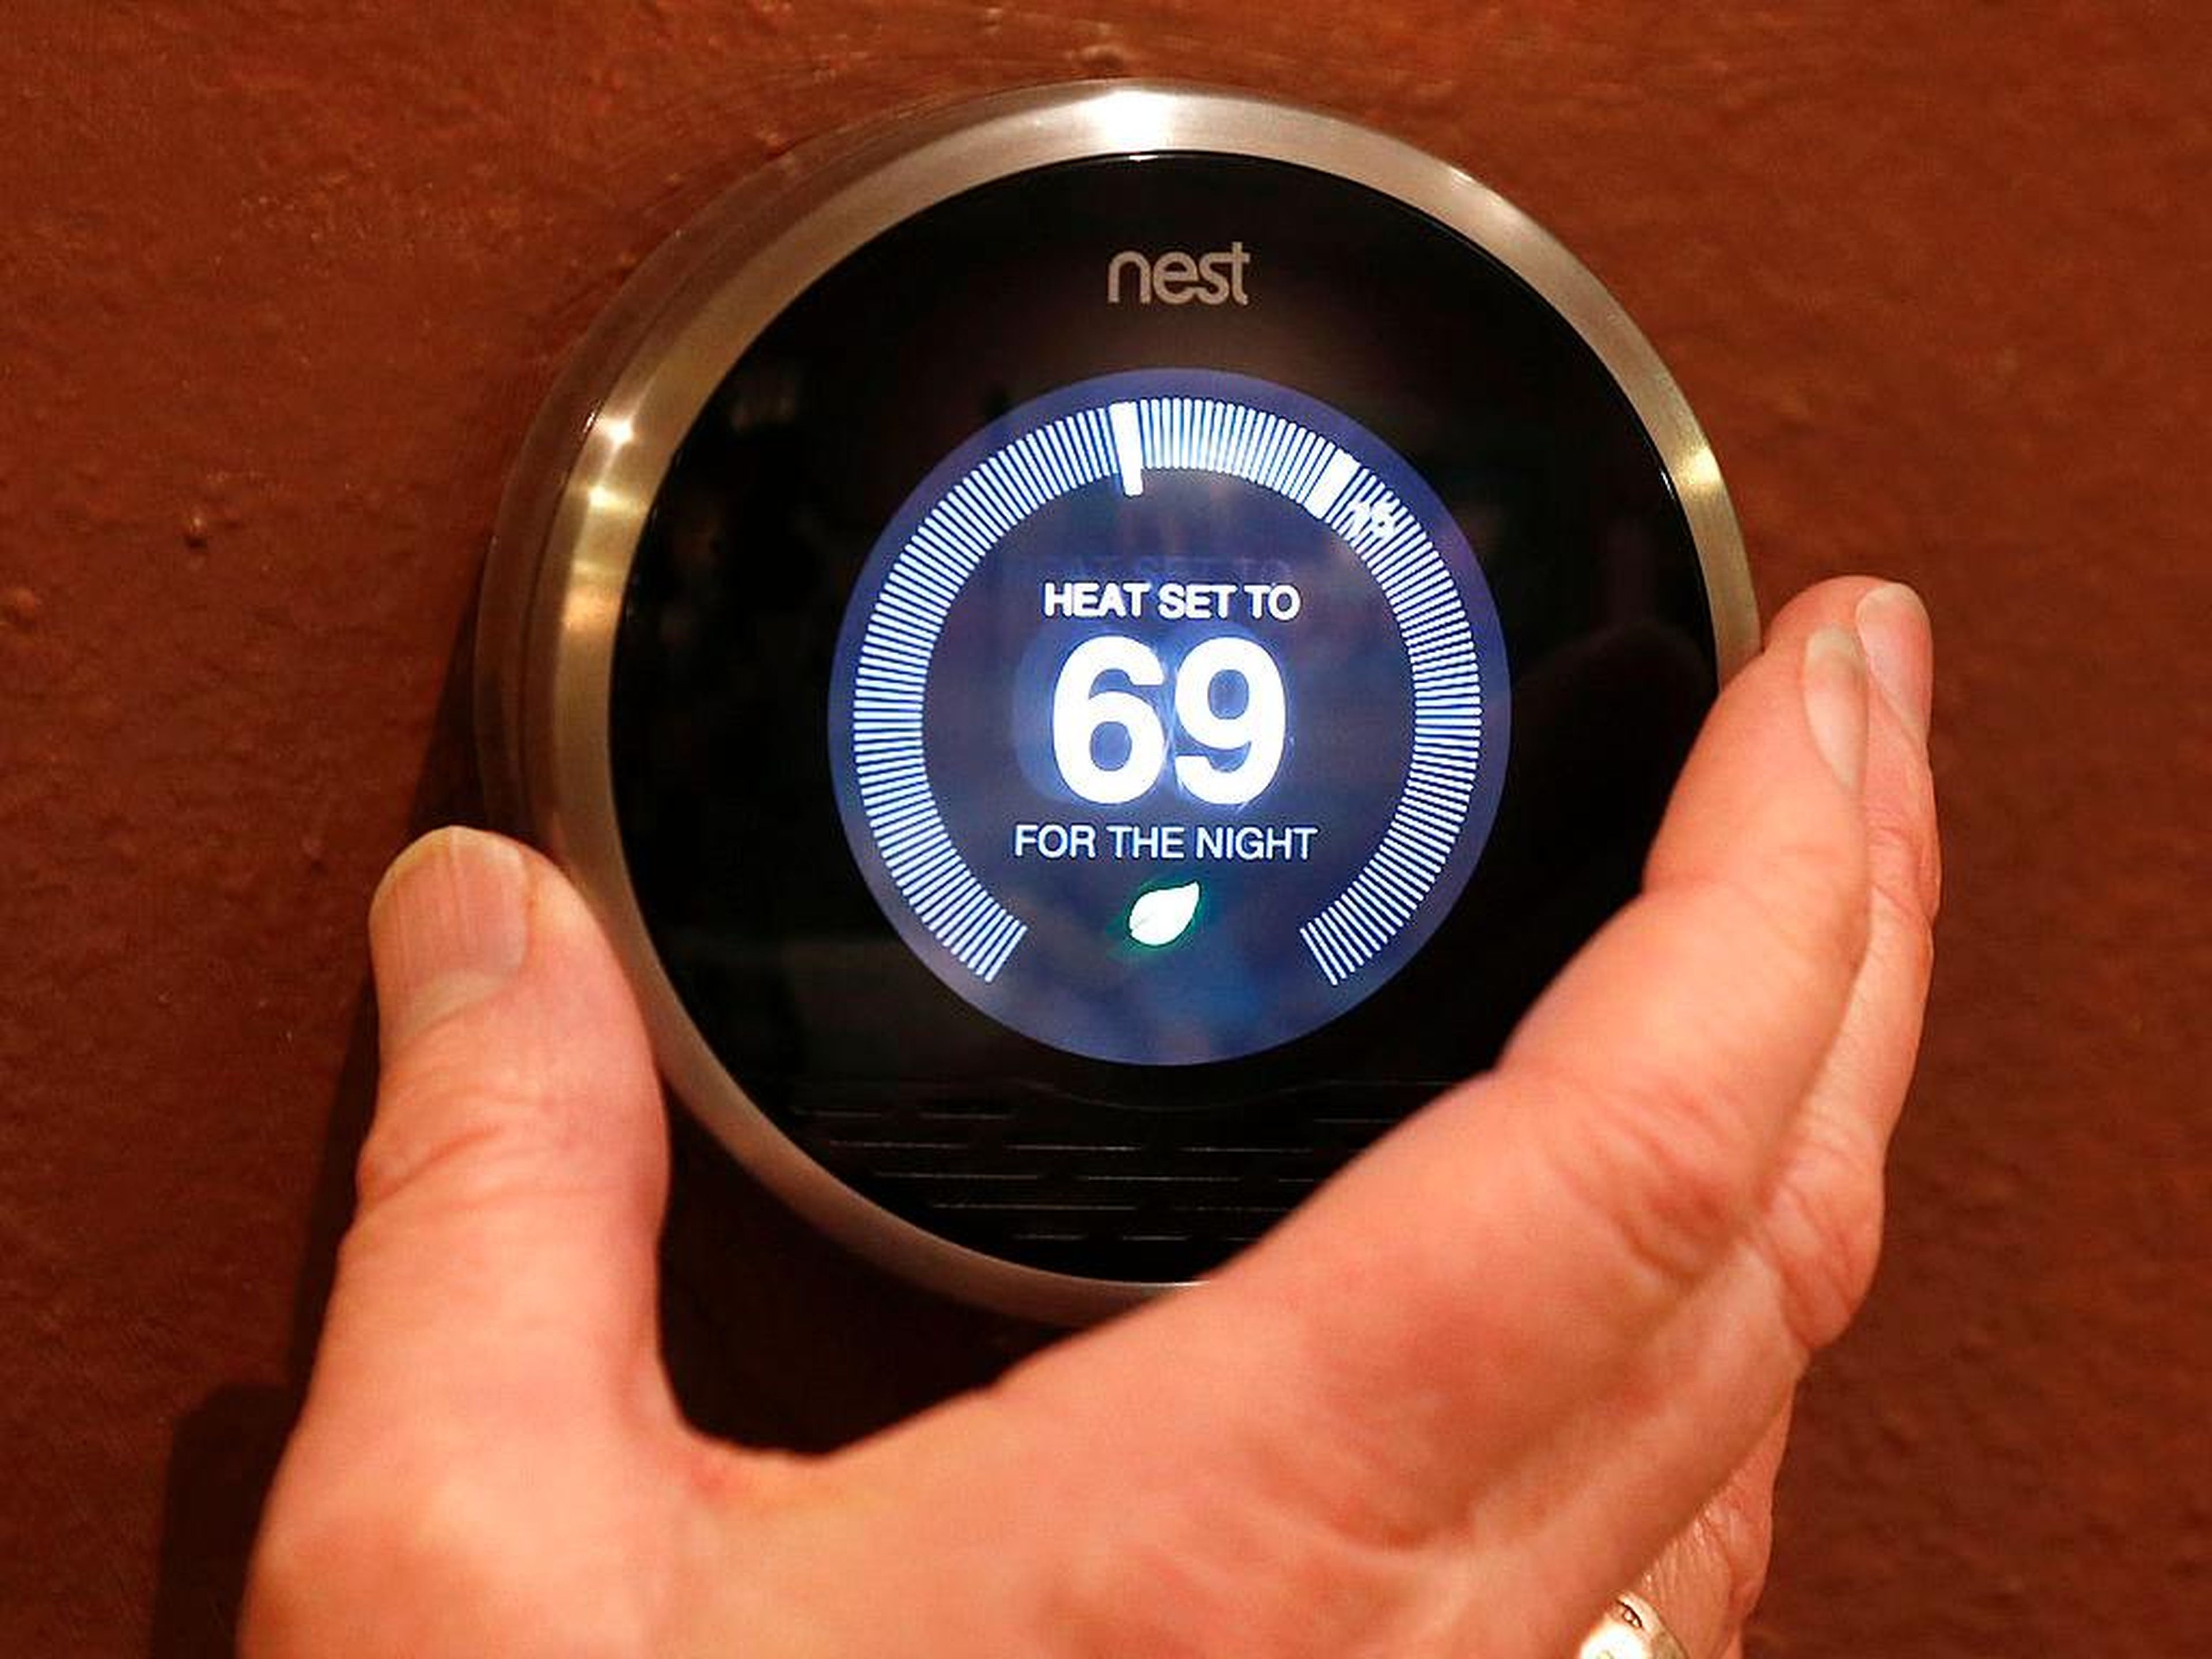 Nest Labs built smart thermostats and other home devices, like outdoor security cameras. The company was acquired by what is now Alphabet in 2014, and in June 2016, CEO Tony Fadell stepped down but remains within Alphabet. He was